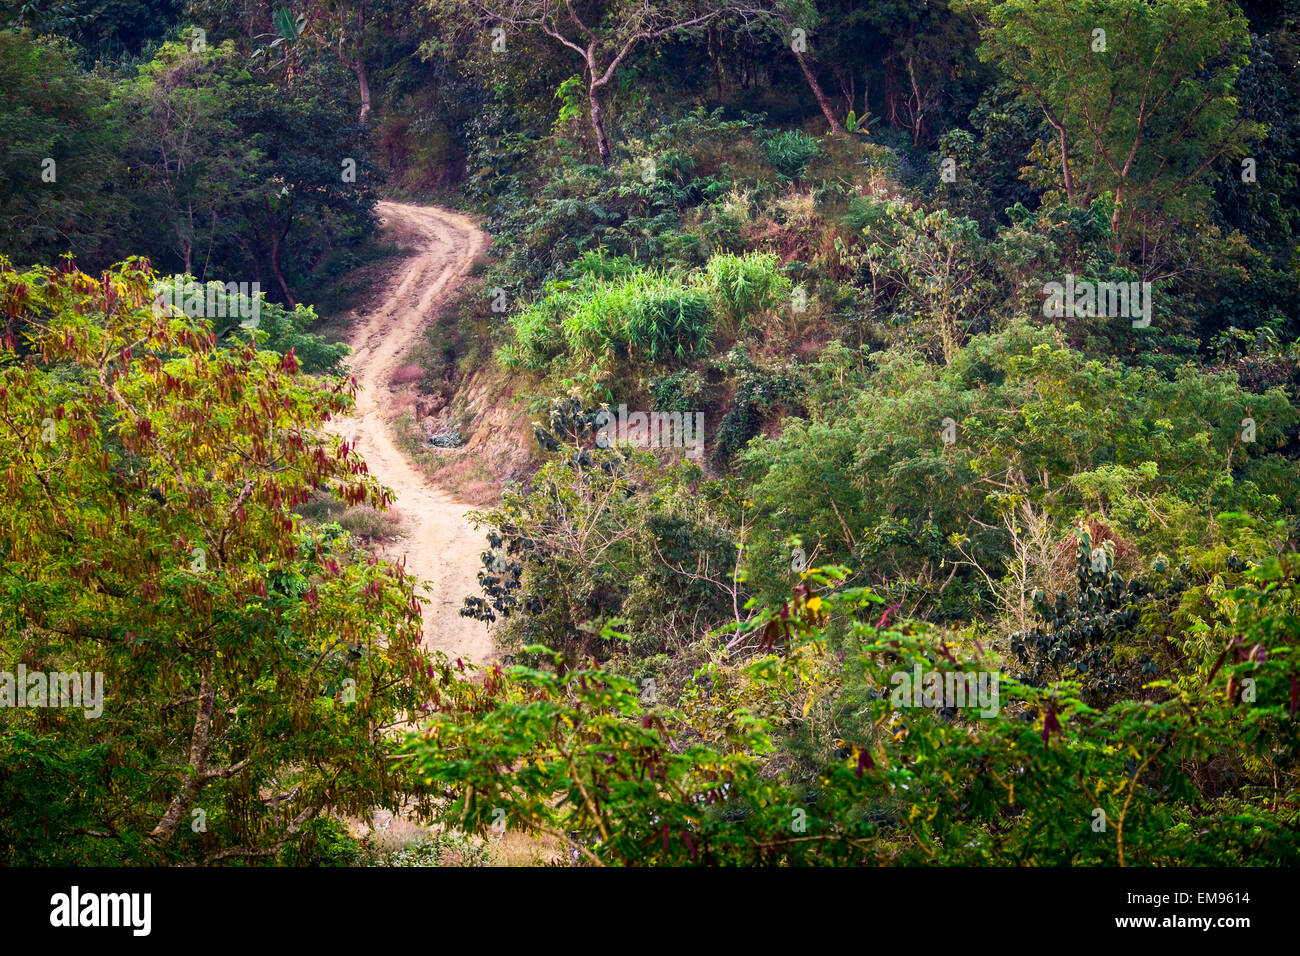 Empty rural road going through tropical forest landscape. Amazing bright colors of nature. Myanmar (Burma) Stock Photo